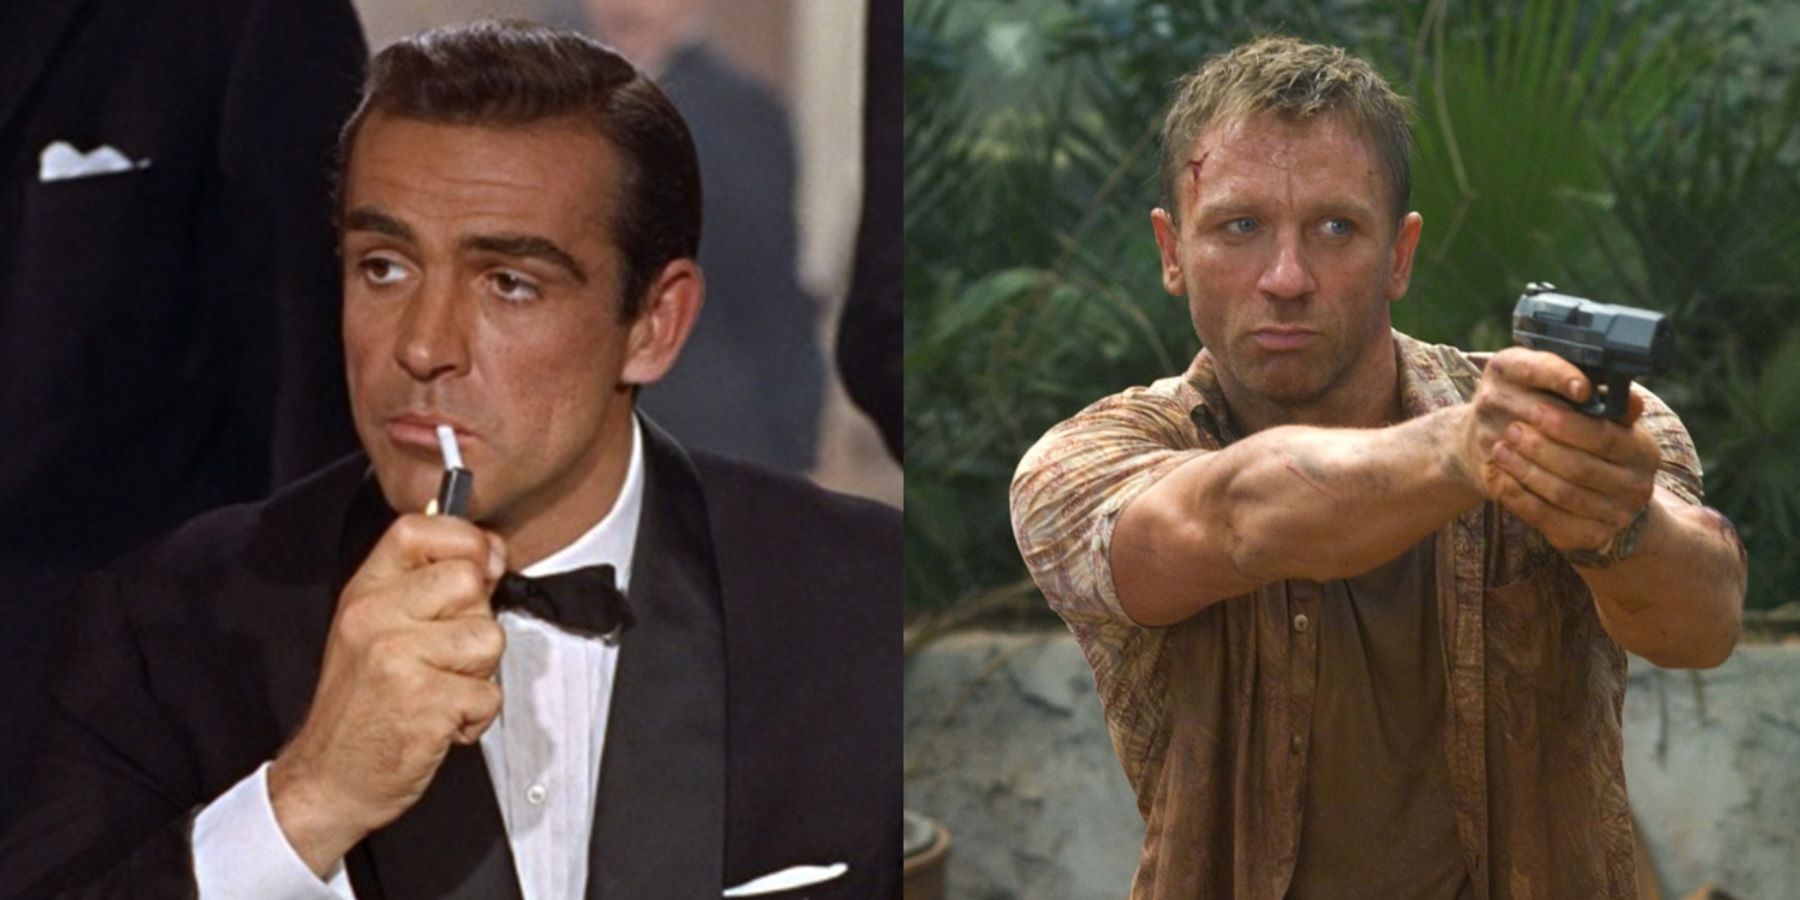 Split image of Sean Connery lighting a cigarette in Dr No and Daniel Craig holding a gun in Casino Royale